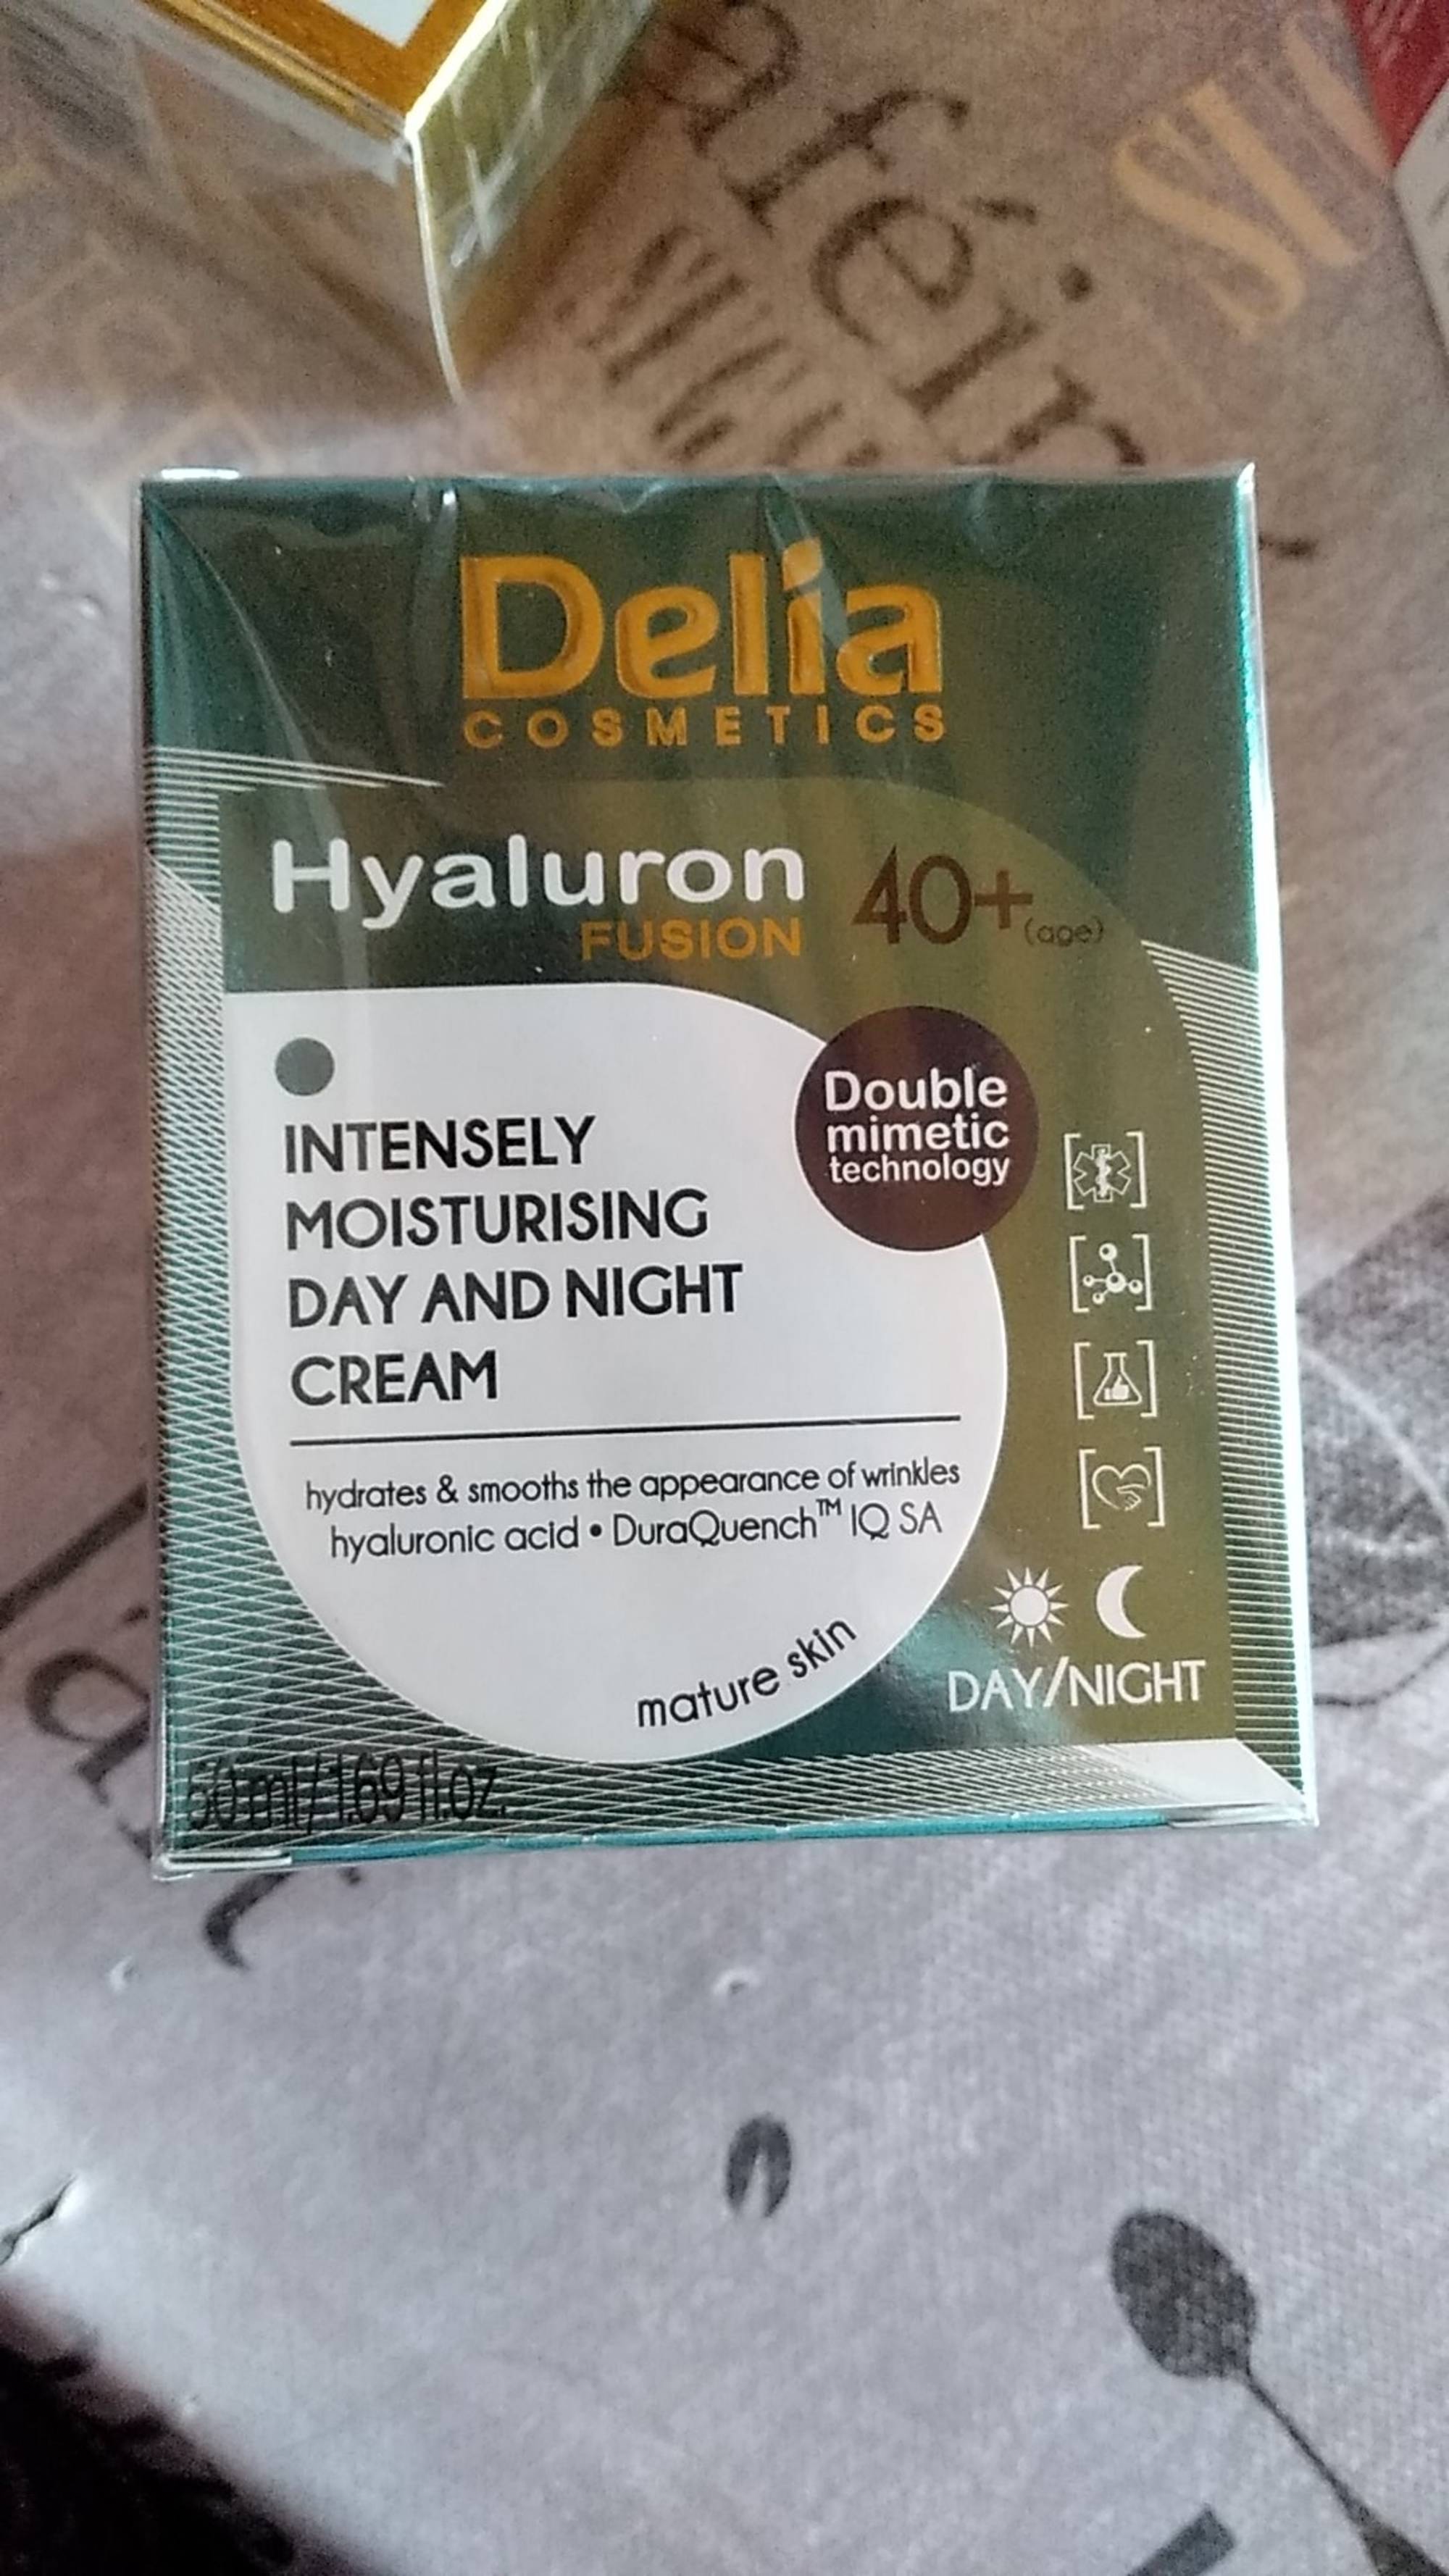 DELIA COSMETICS - Hyaluron fusion 40+ - Intensely moisturising day and night cream